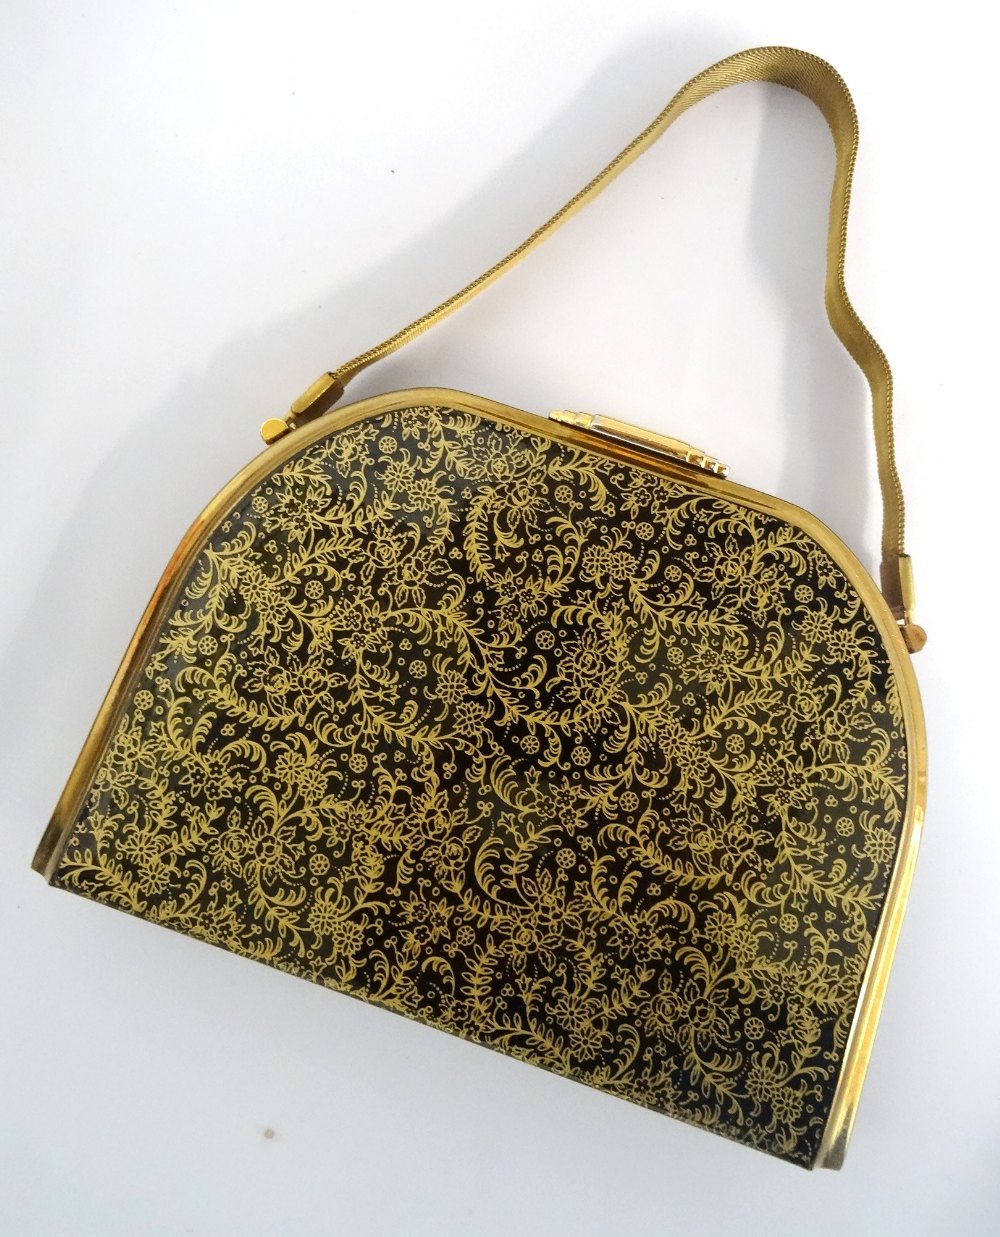 1950s HARD SHELL EVENING BAG BY STRATTON with floral gilt decoration on a black ground, opening to - Image 2 of 2